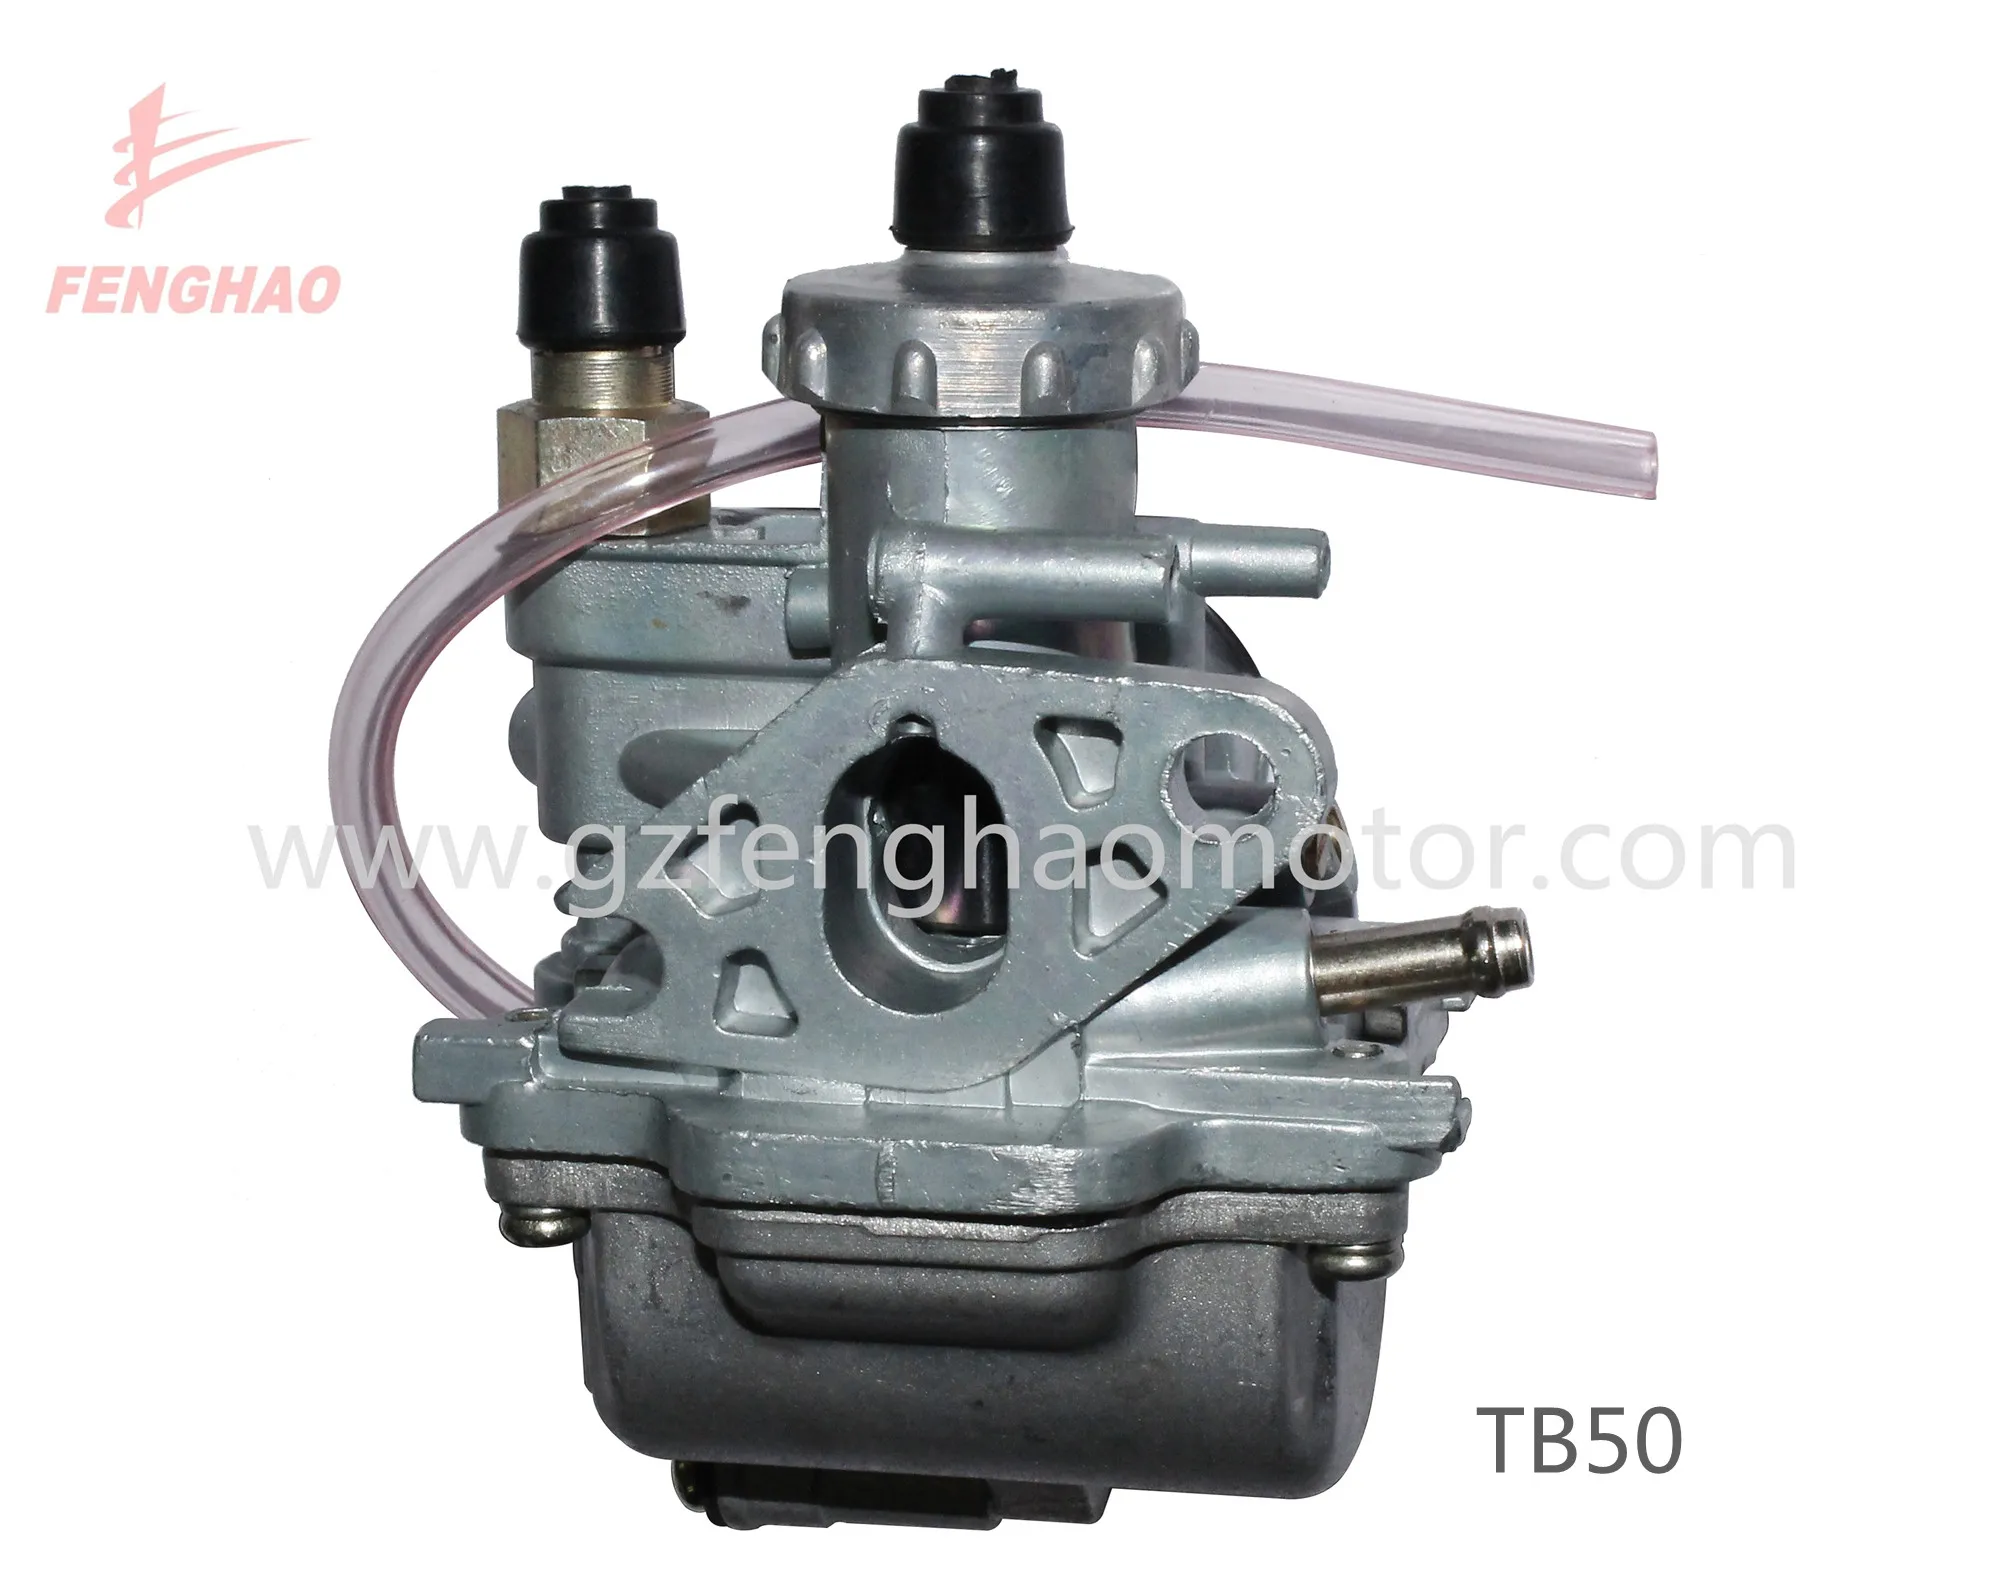 Hight Quality fenghao 2 stroke Motorcycle Carburetor for SUZUKI TB50